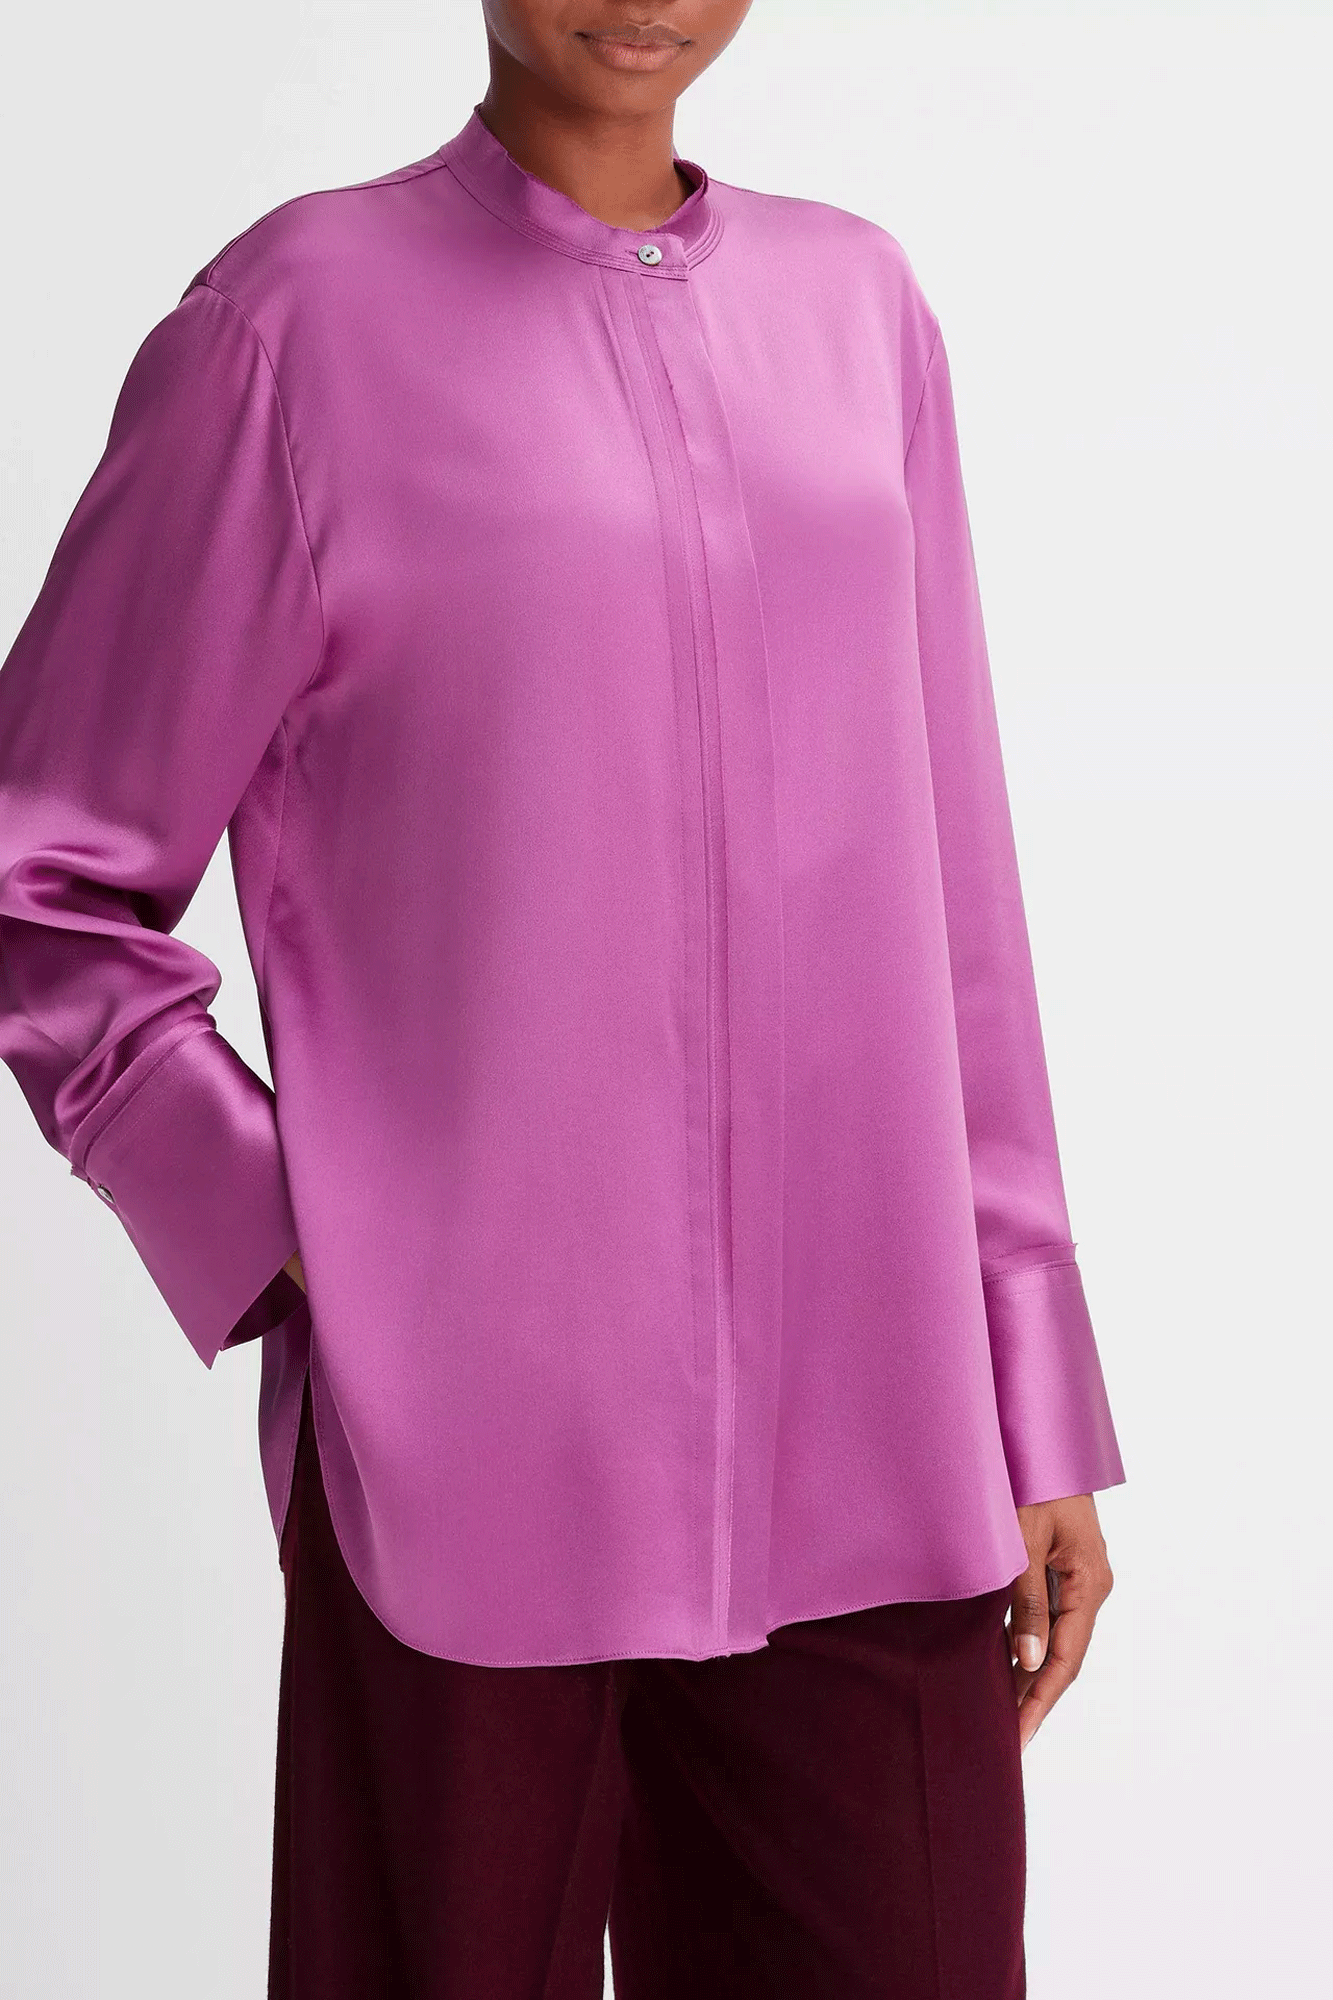 Upgrade your wardrobe with this Raw Edge Band Collar Blouse from Vince. Crafted from a luxurious silk satin and adorned with double-layer raw-edge stitching, this blouse exudes sophistication. A hidden placket adds a smooth, streamlined finish. Look and feel your best in this timeless classic.